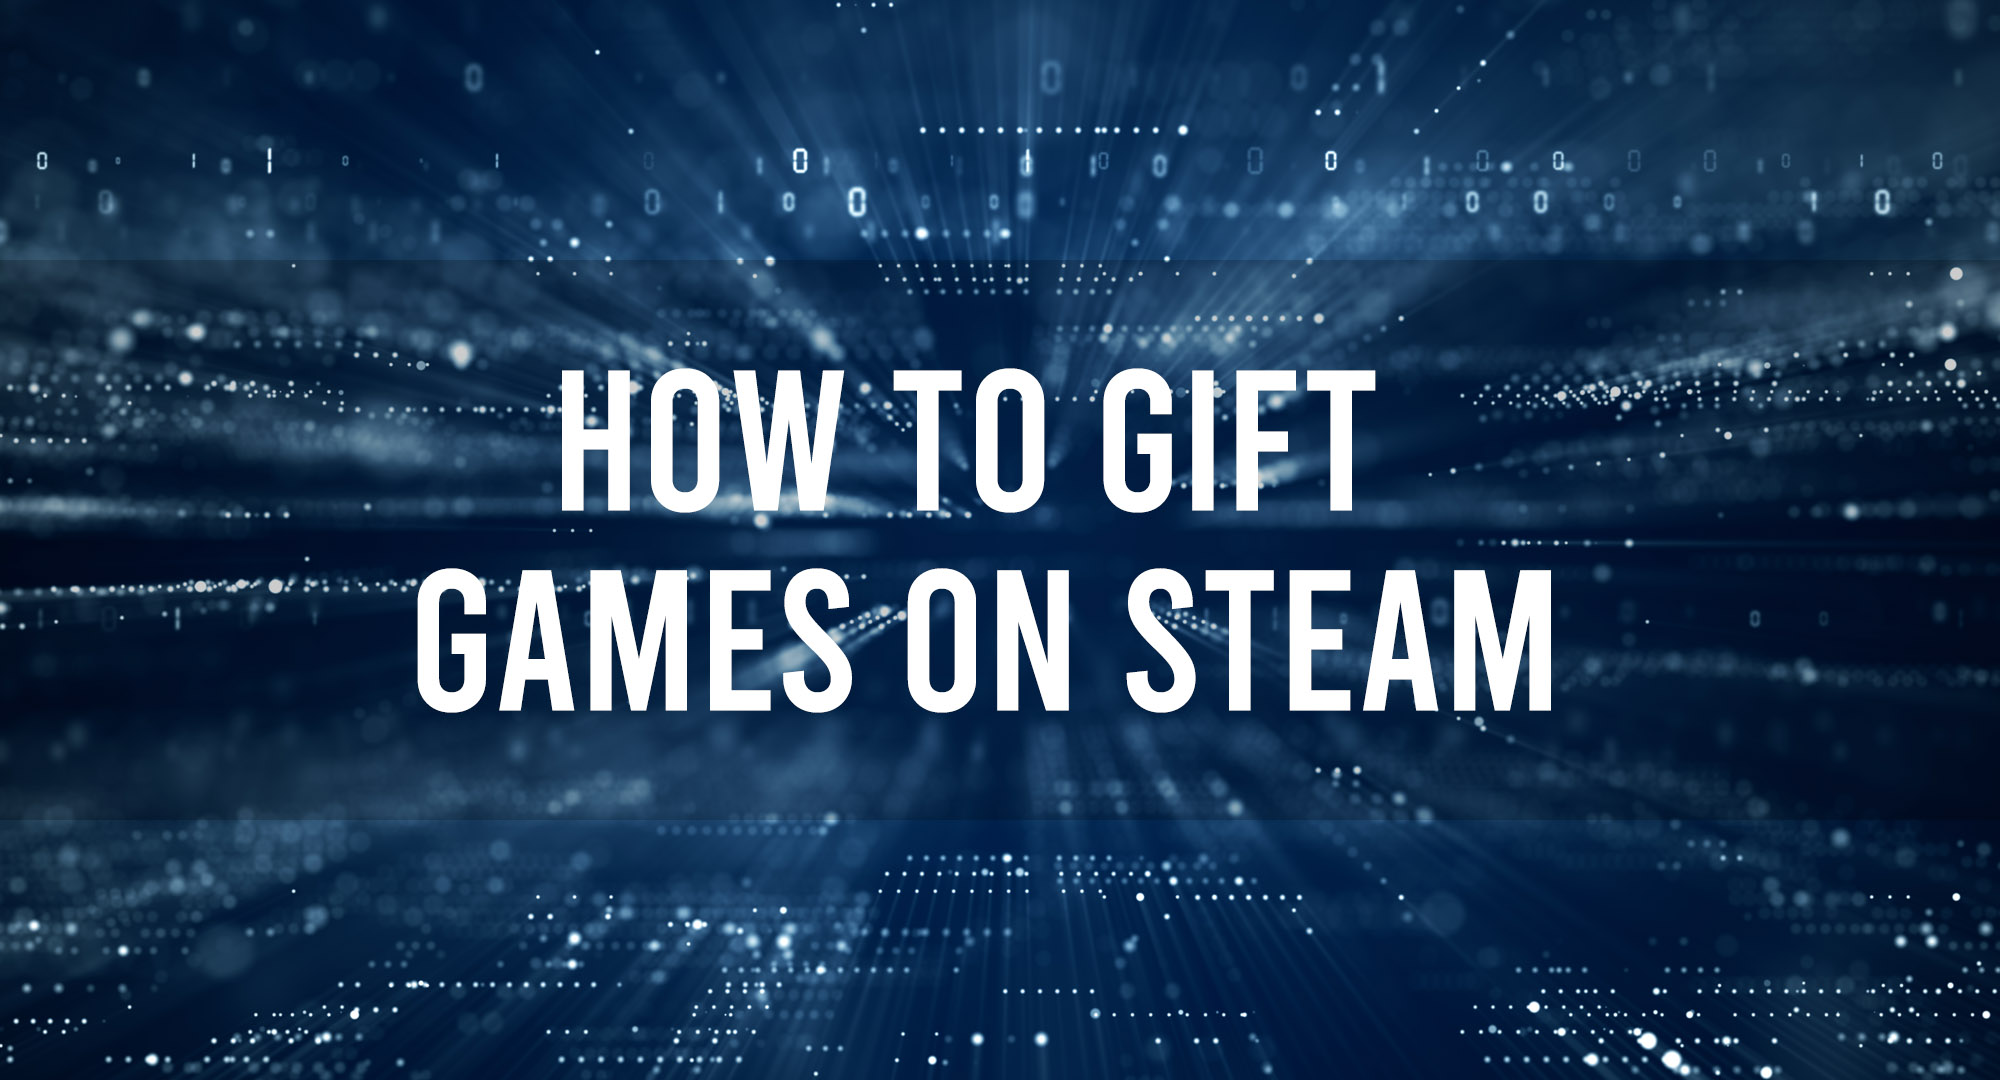 How to gift games on steam